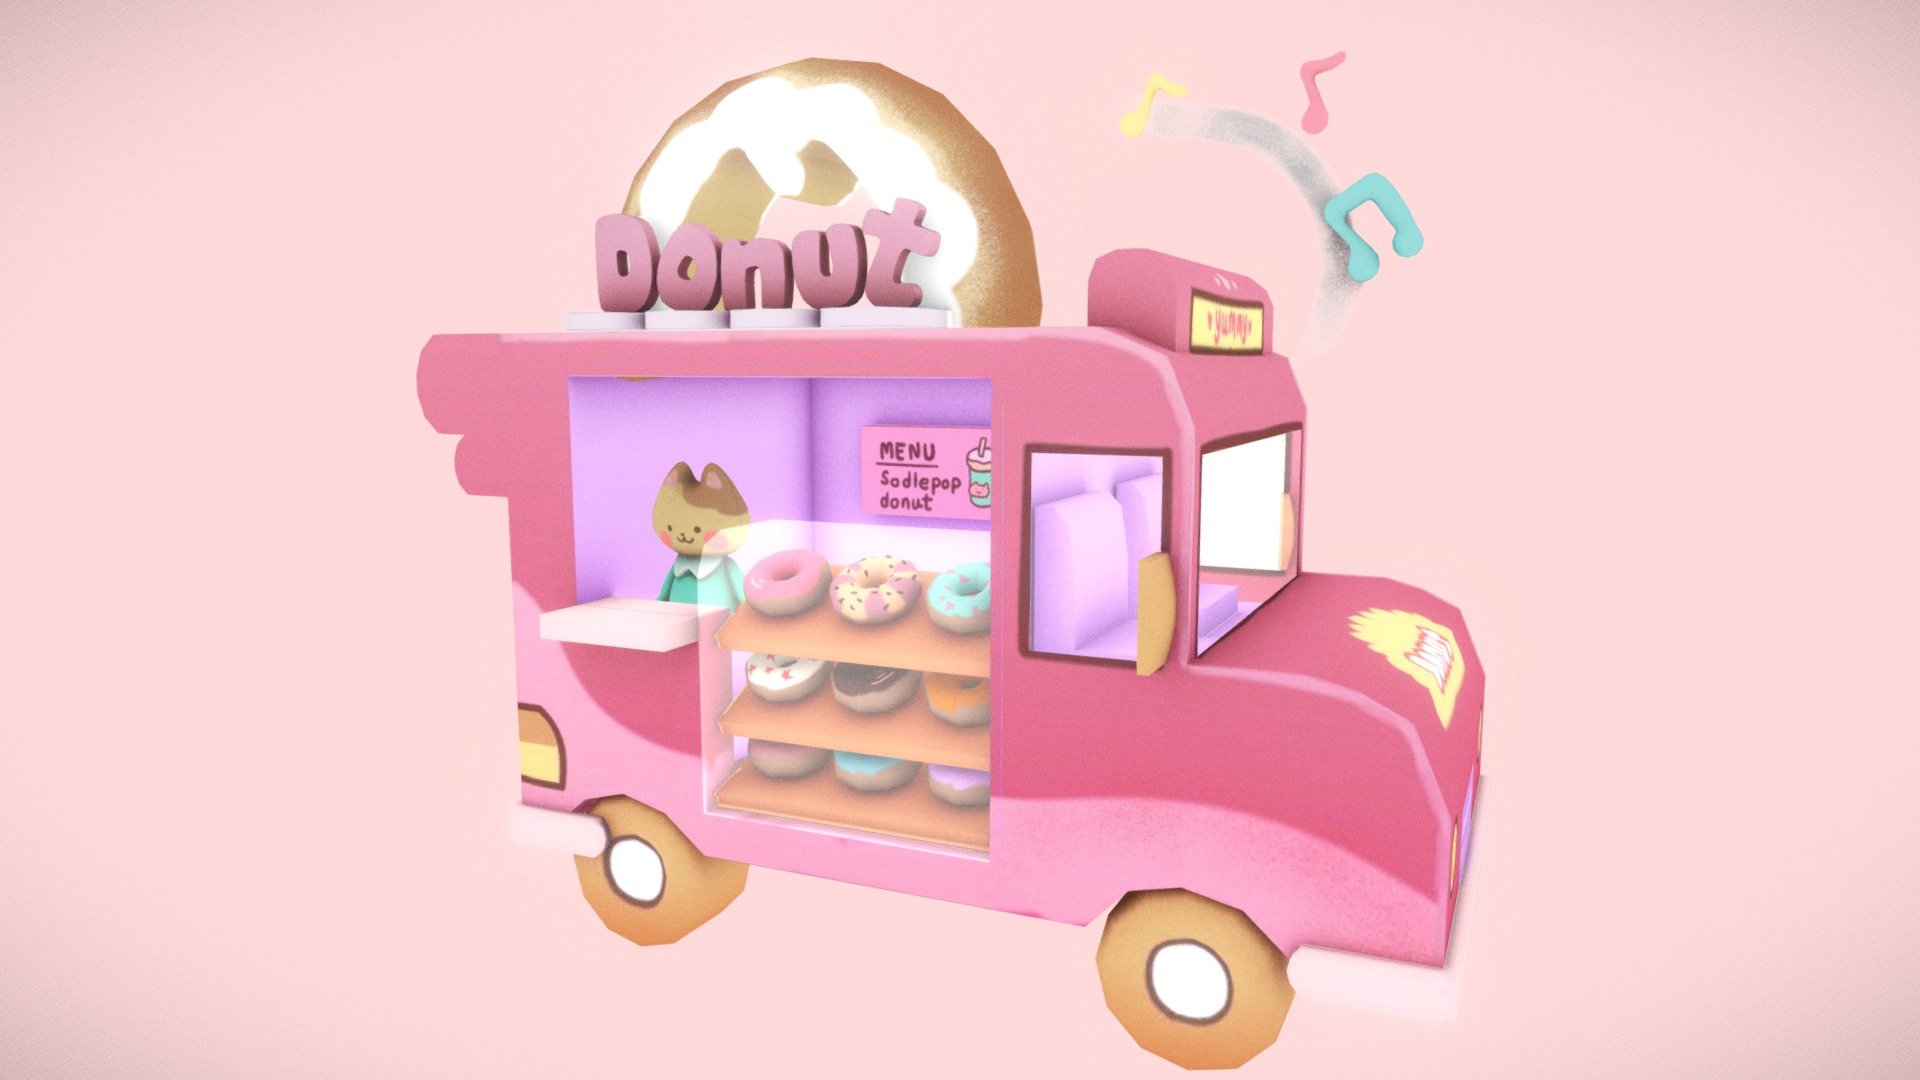 This is fanart 3d model version
I following chanteii_ in Instagram and i saw many kawaii arts 

This model concept from chanteii_
and model&amp;texture by me :)) - Donut Shop!! - 3D model by salmonclosebeta 3d model